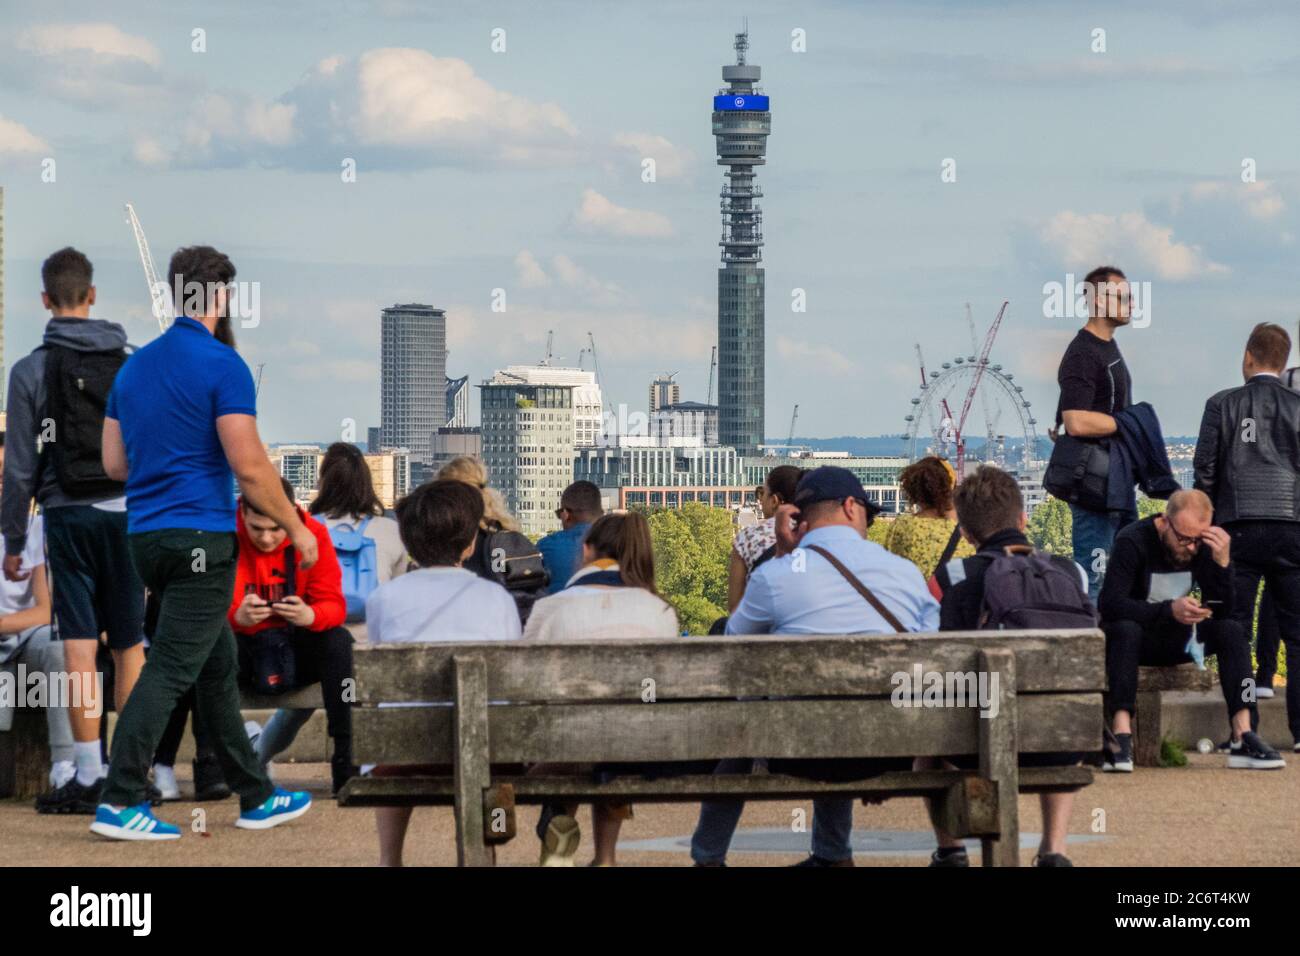 London, UK. 11th July, 2020. The BT tower continues to display the government's message of 'Stay Alert, Control the Virus' - People enjoy a sunny evening on Primrose Hill overlooking the city. The 'lockdown' continues to be eased for the Coronavirus (Covid 19) outbreak in London. Credit: Guy Bell/Alamy Live News Stock Photo